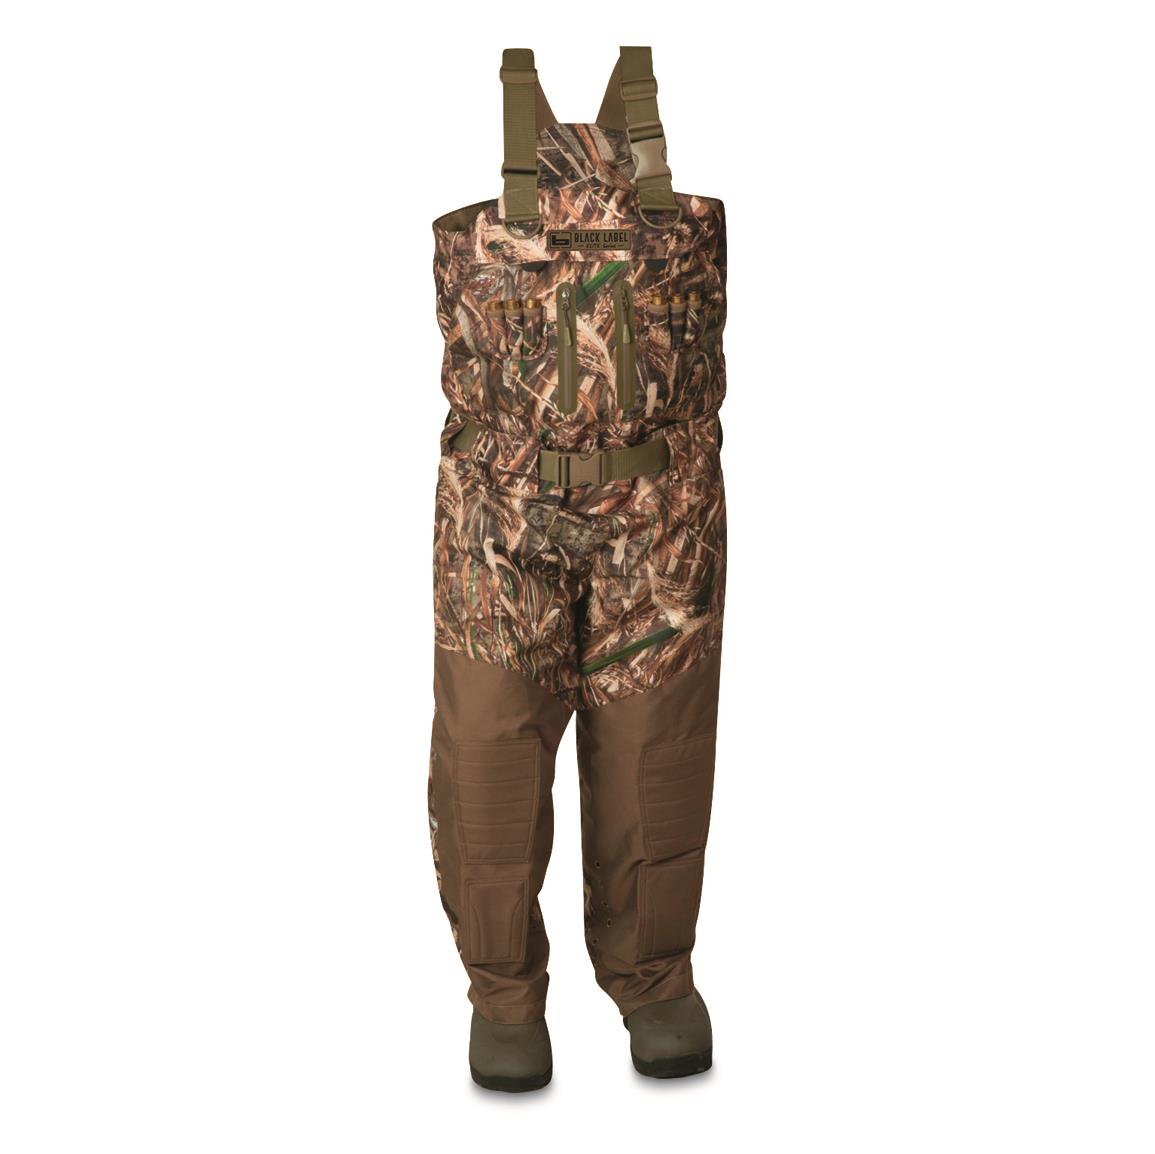 Banded Black Label 2.0 Elite Breathable Insulated Bootfoot Chest Waders, 2,000-gram, Realtree MAX-5®